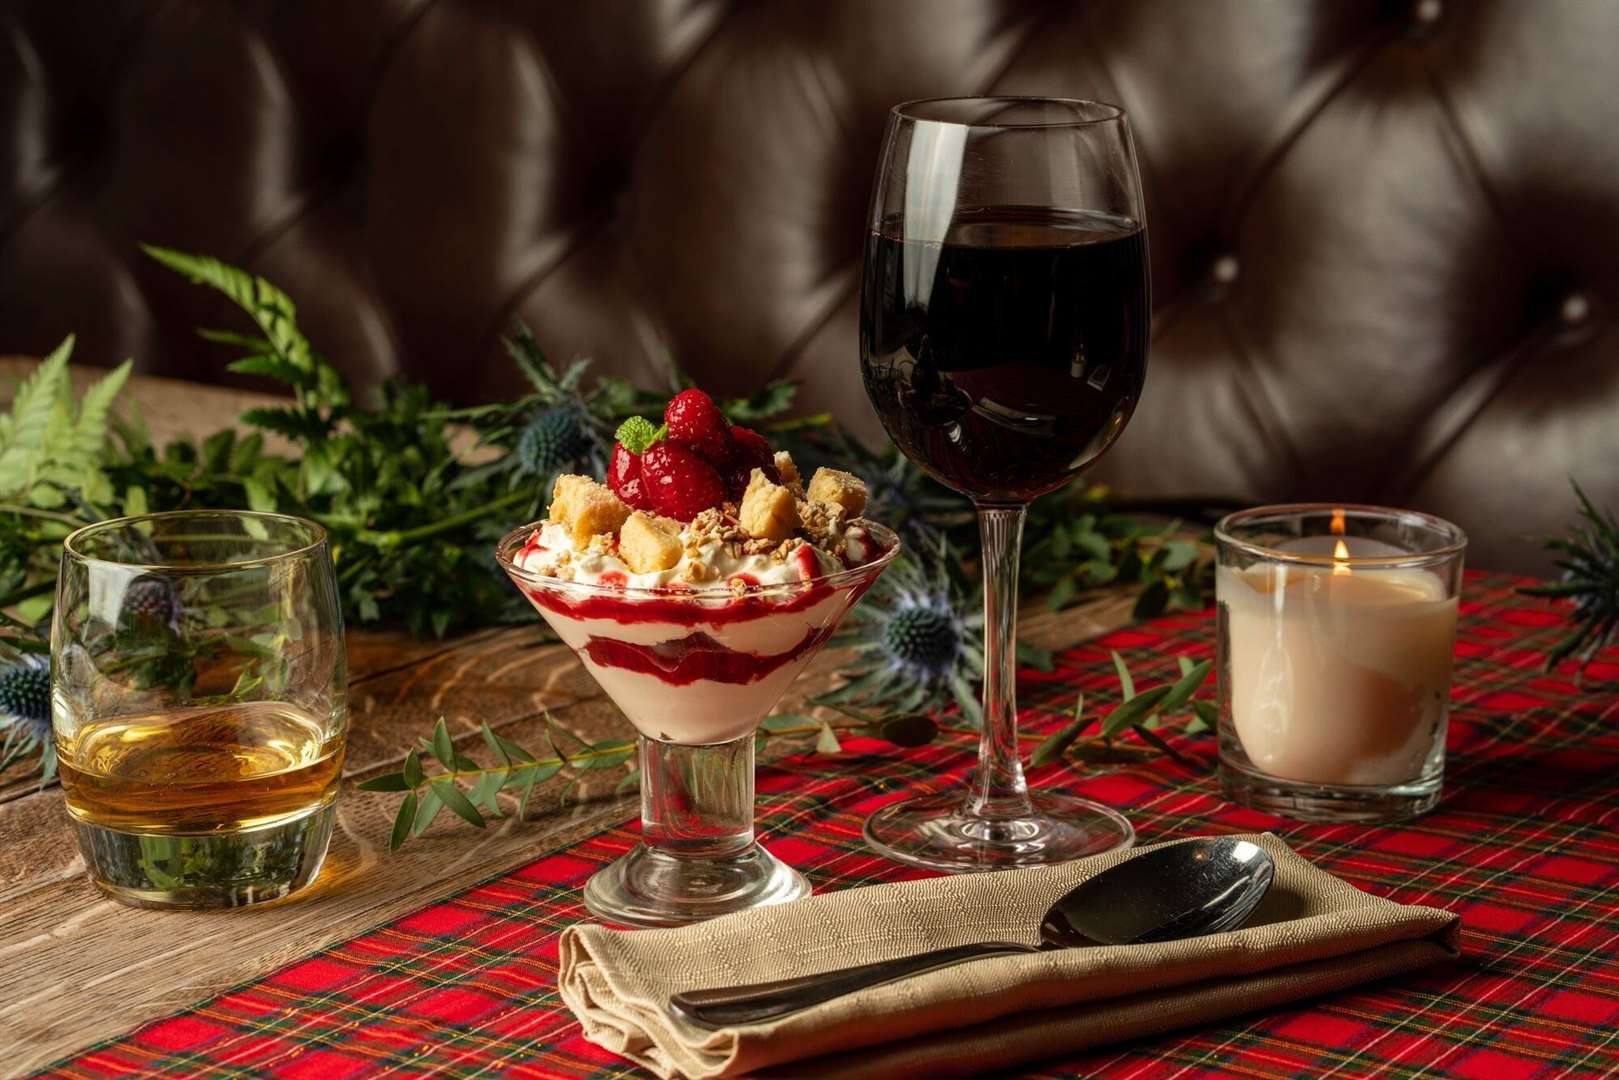 Cranachan with whipped whisky and oat cream, raspberry compote and Scottish shortbread. Picture: Frankie Julian / Shepherd Neame